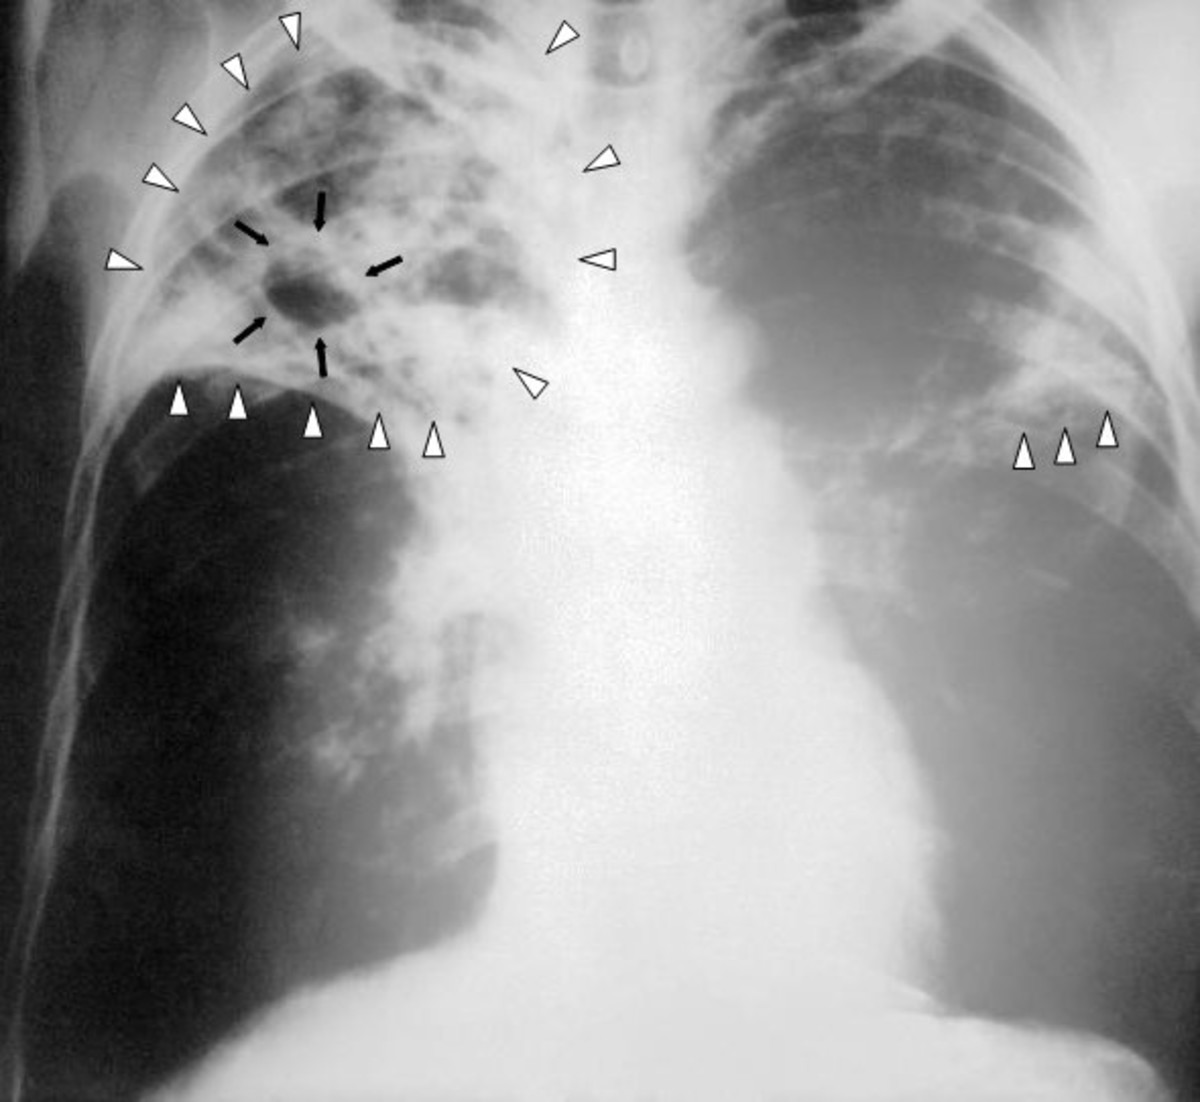 Lungs shows TB